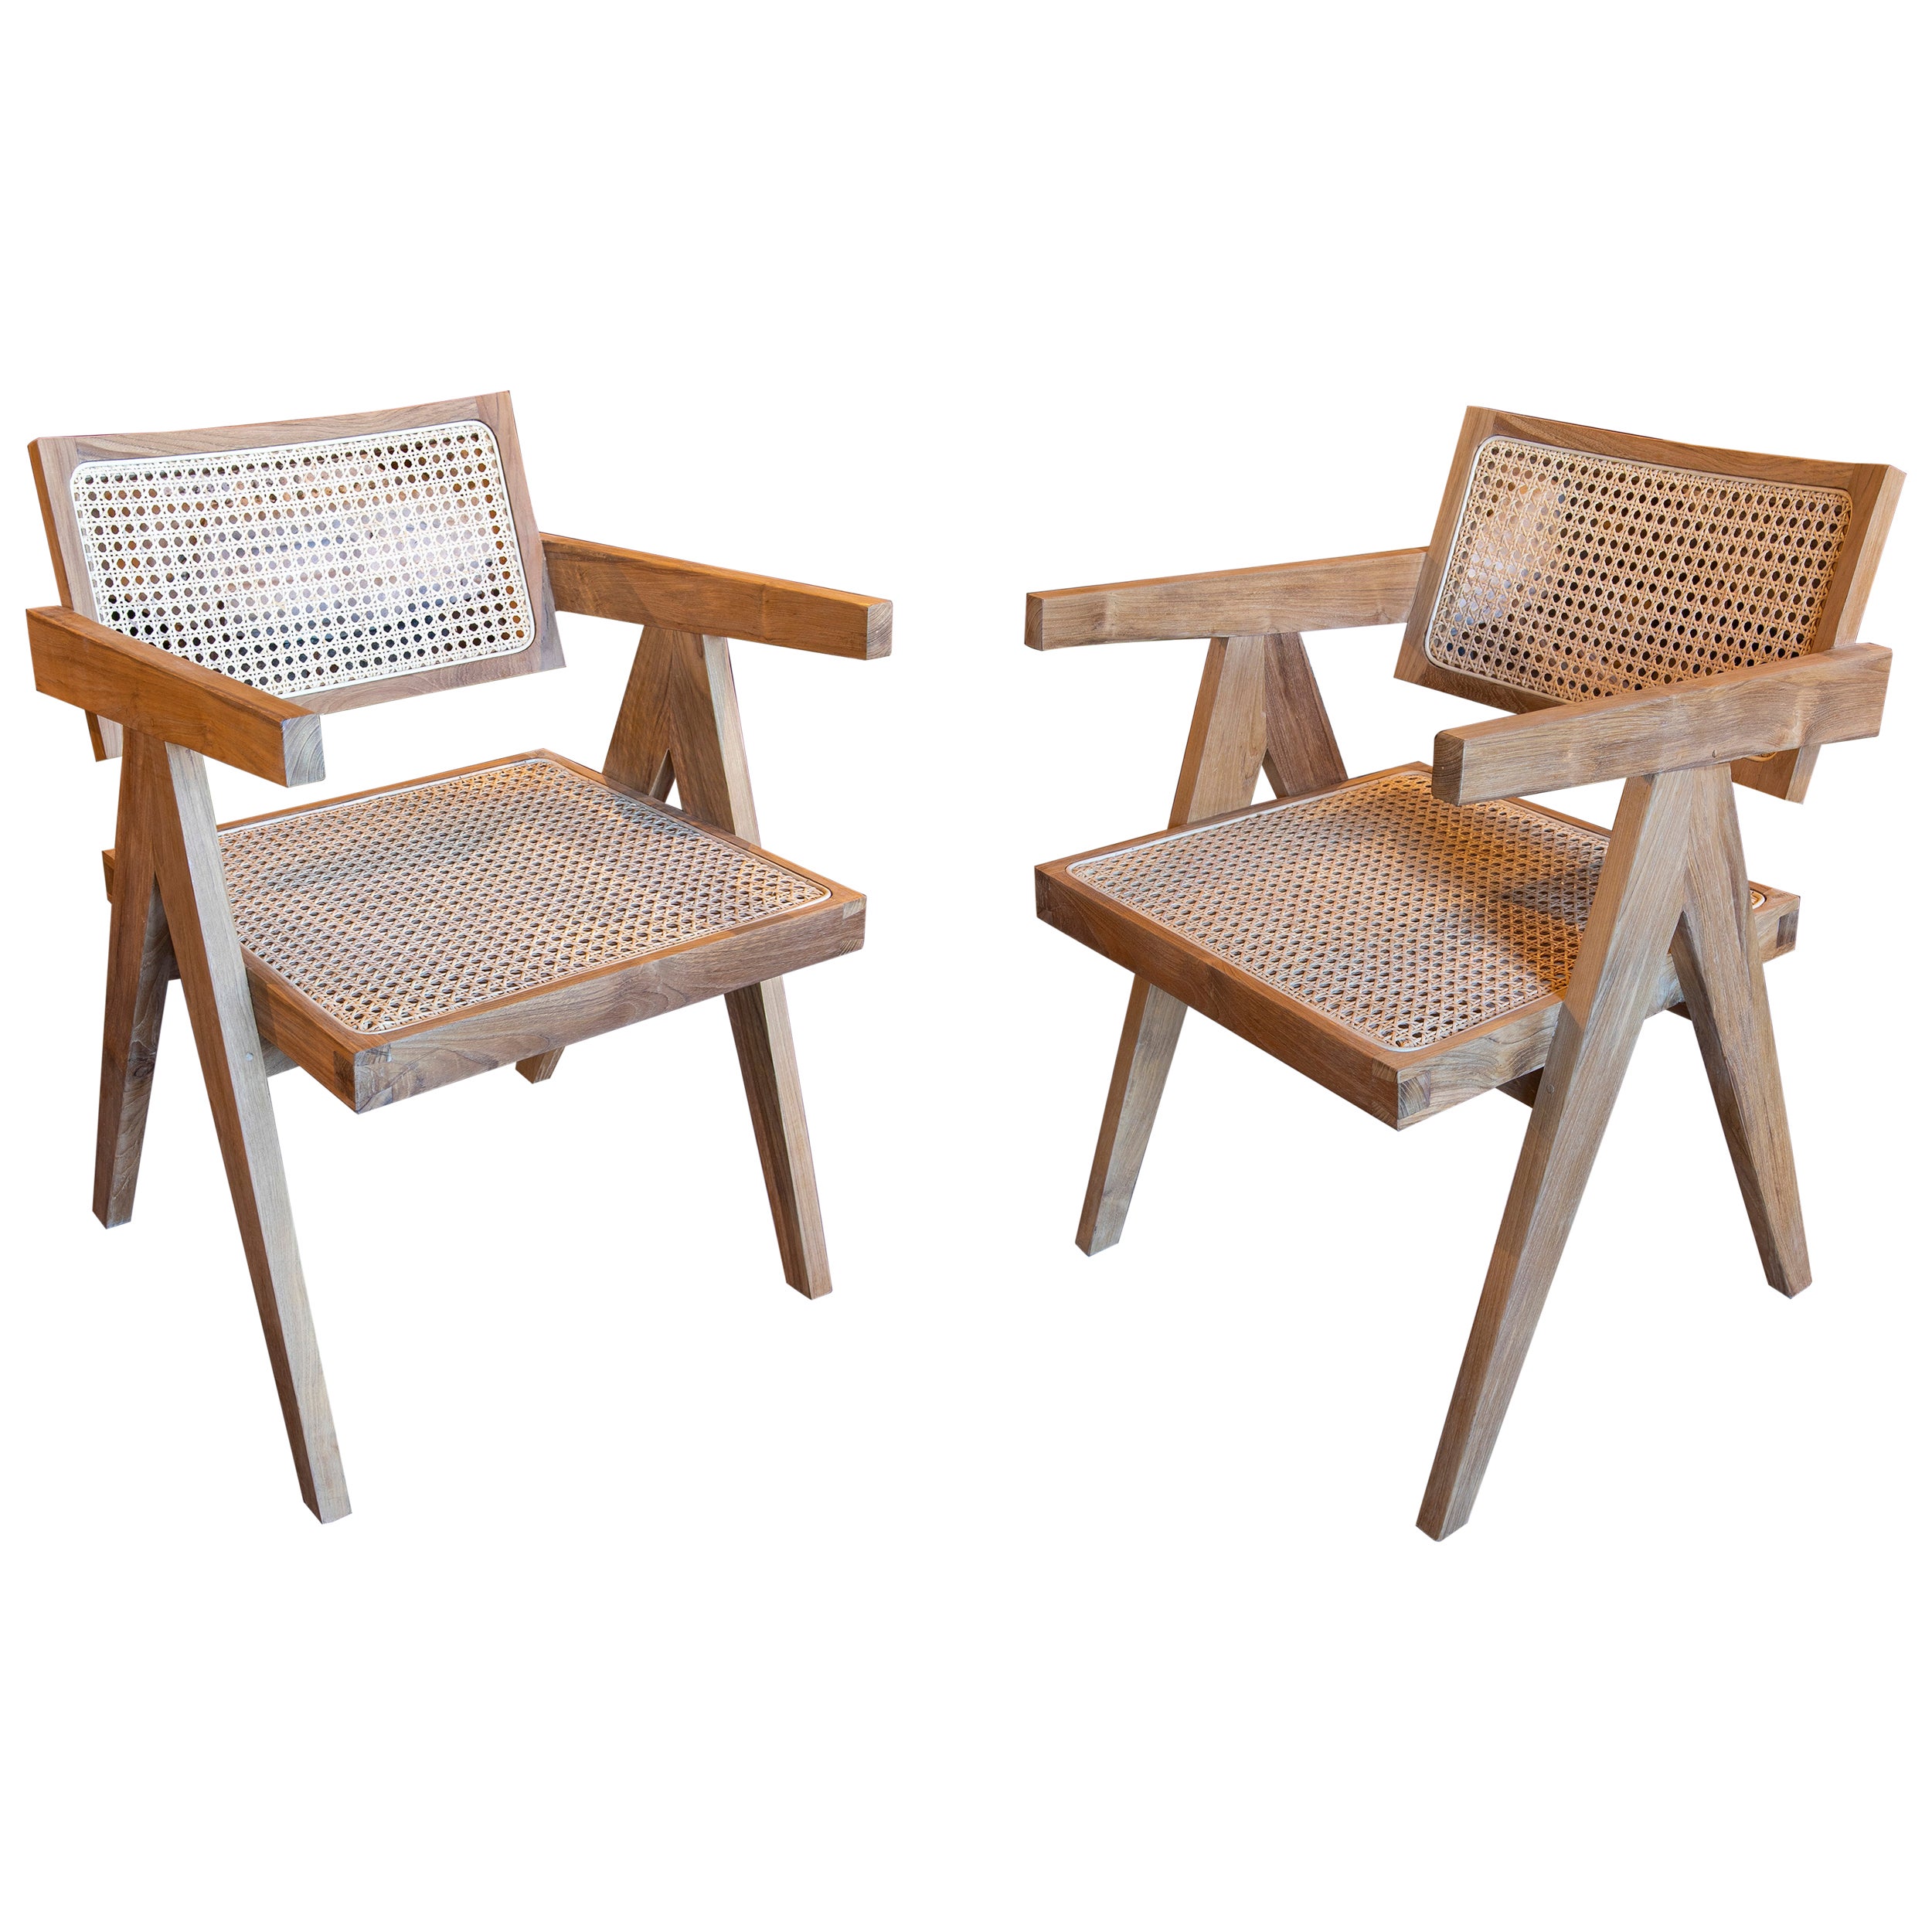 Pair of Wooden Armchairs with Wicker Backrest and Seat